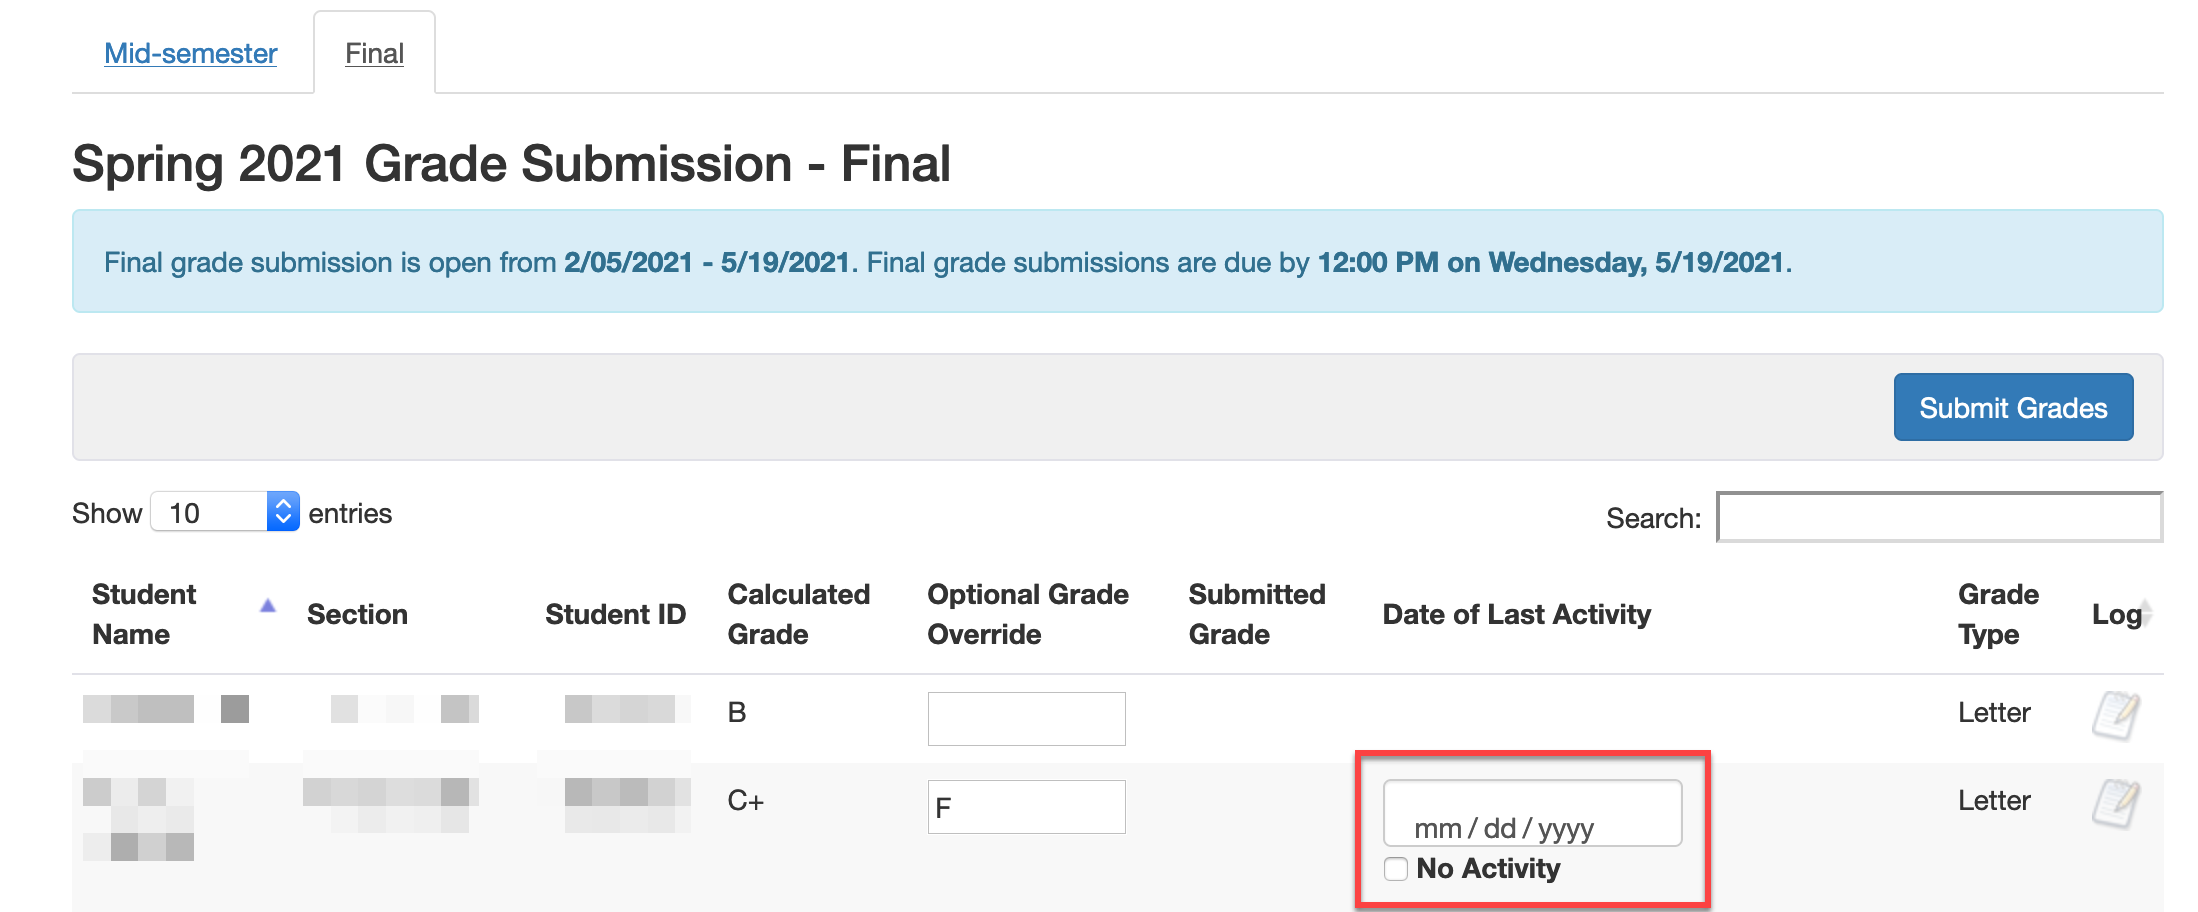 Image showing Date of Last Activity column in final grades tool. The Date of Last Activity column is between the Submitted Grade column and the Grade Type column.